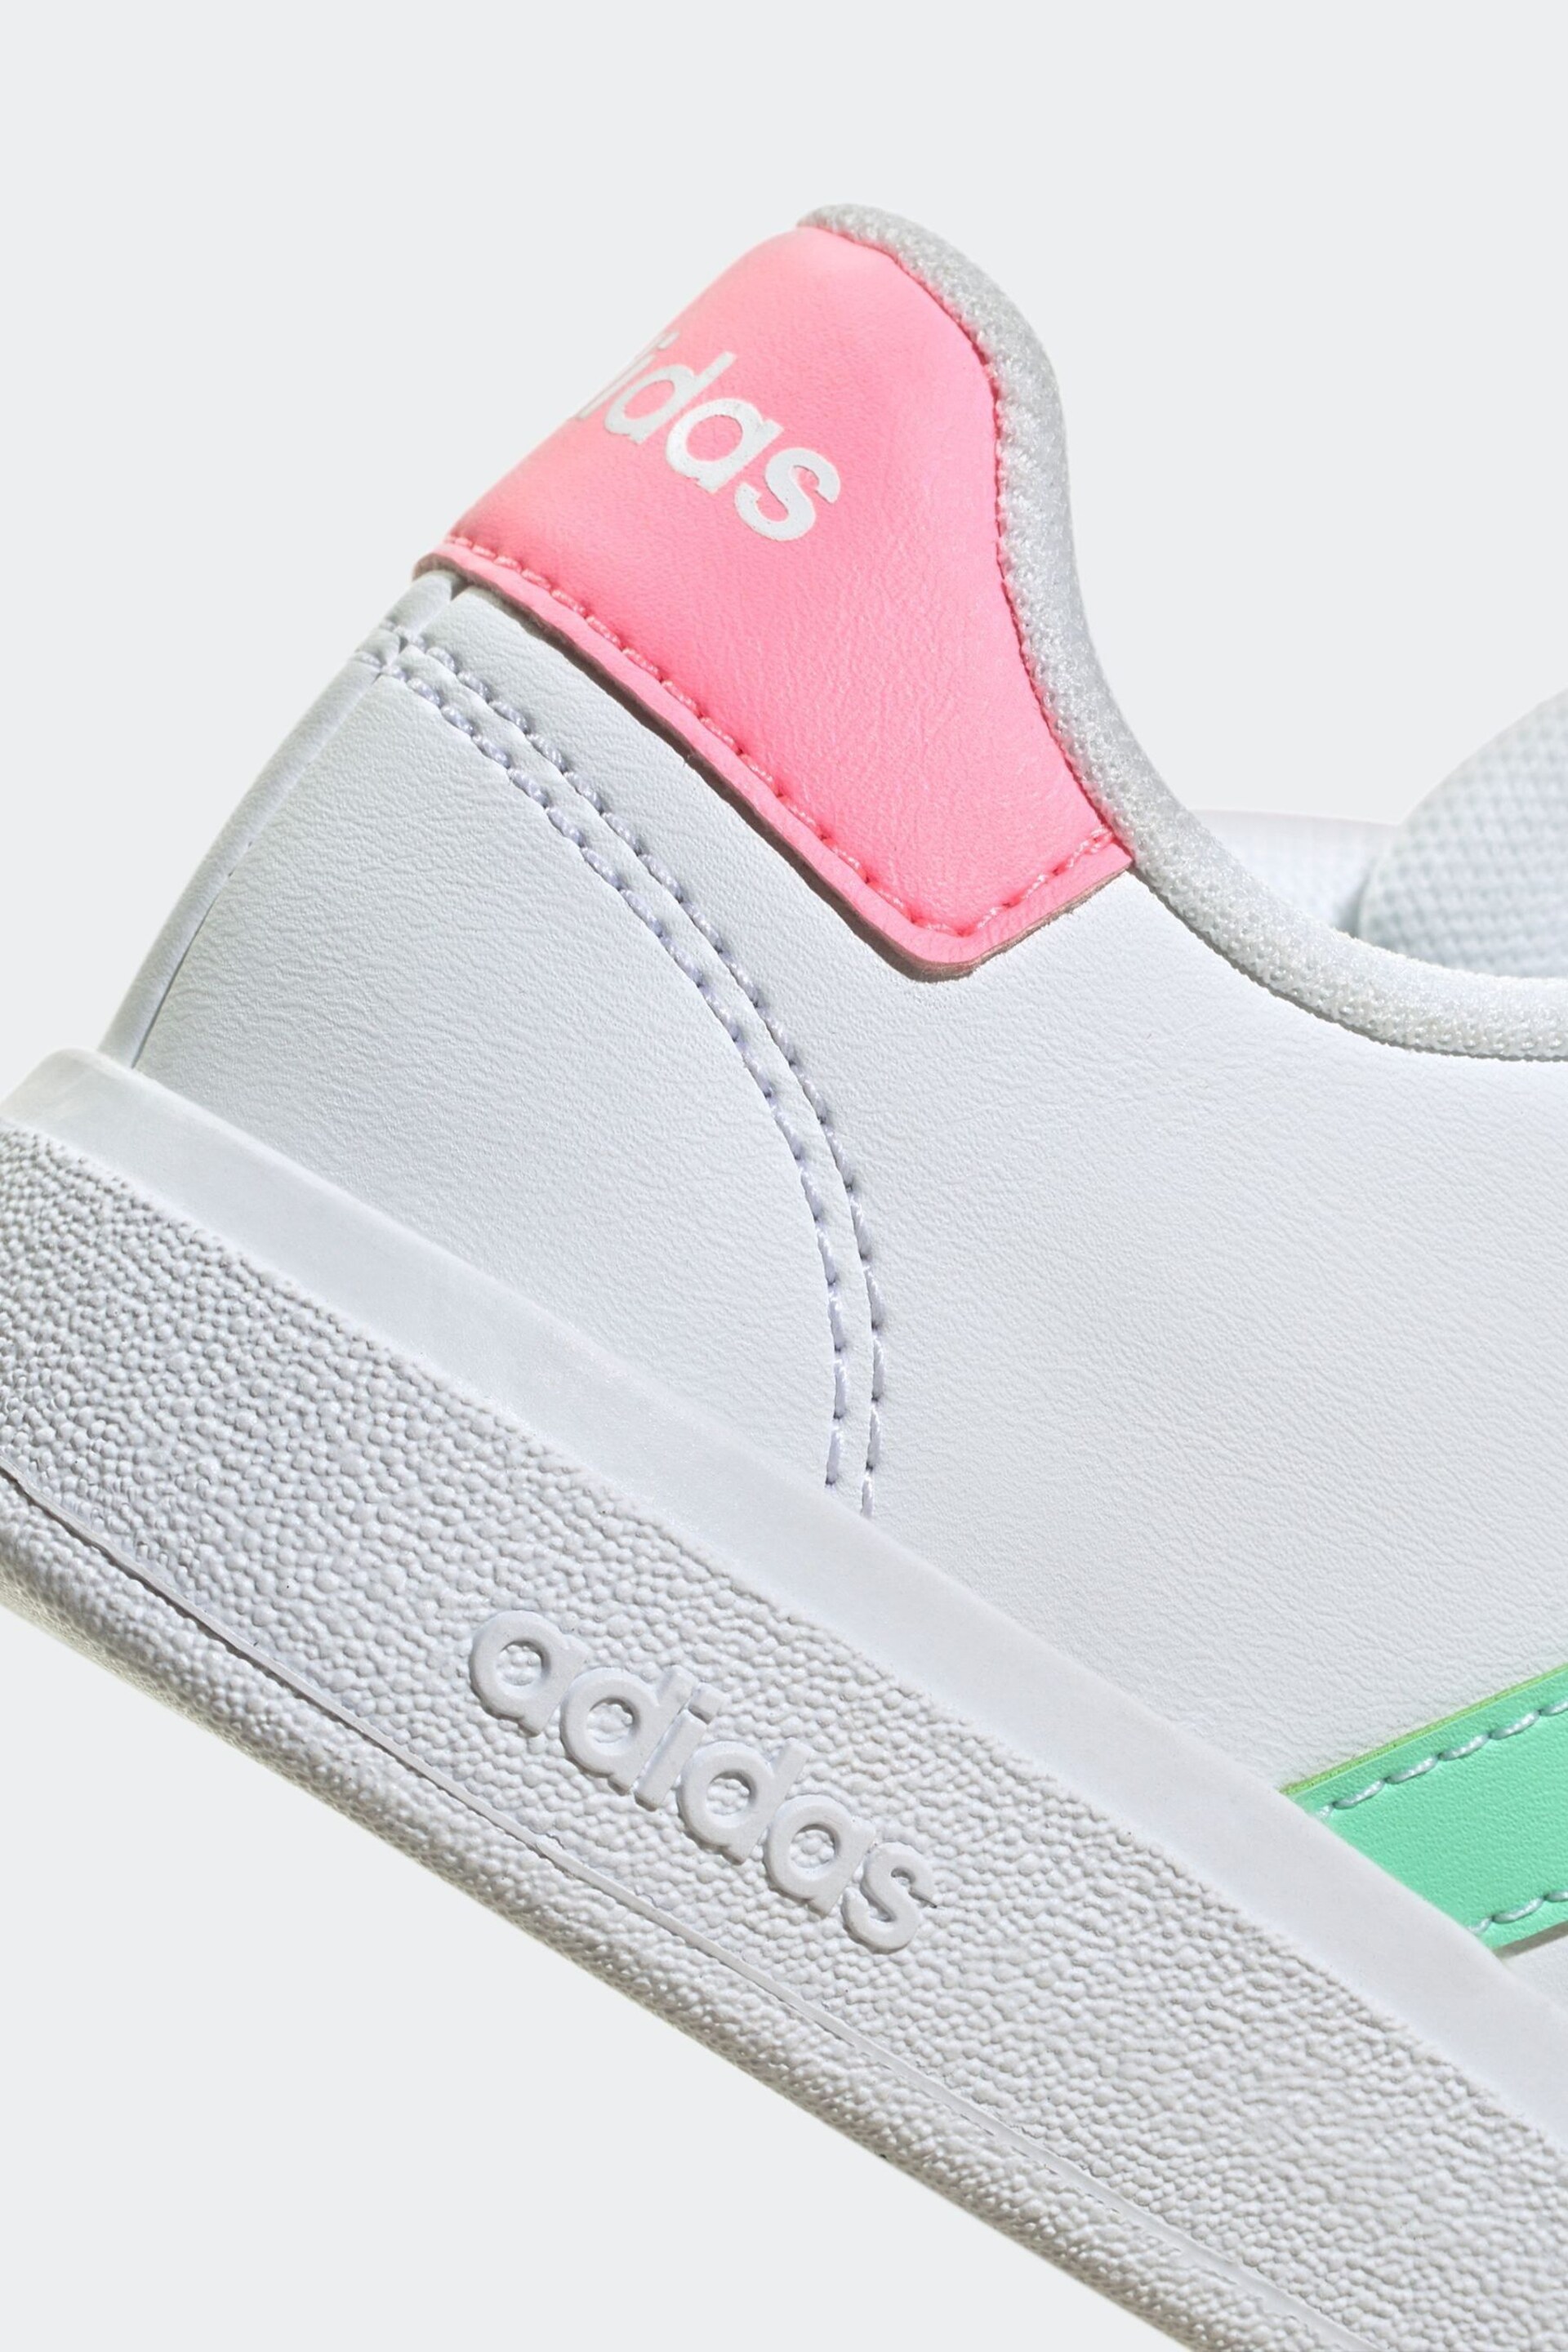 adidas White/Pink Sportswear Kids Grand Court Elastic Lace and Top Strap Trainers - Image 9 of 9